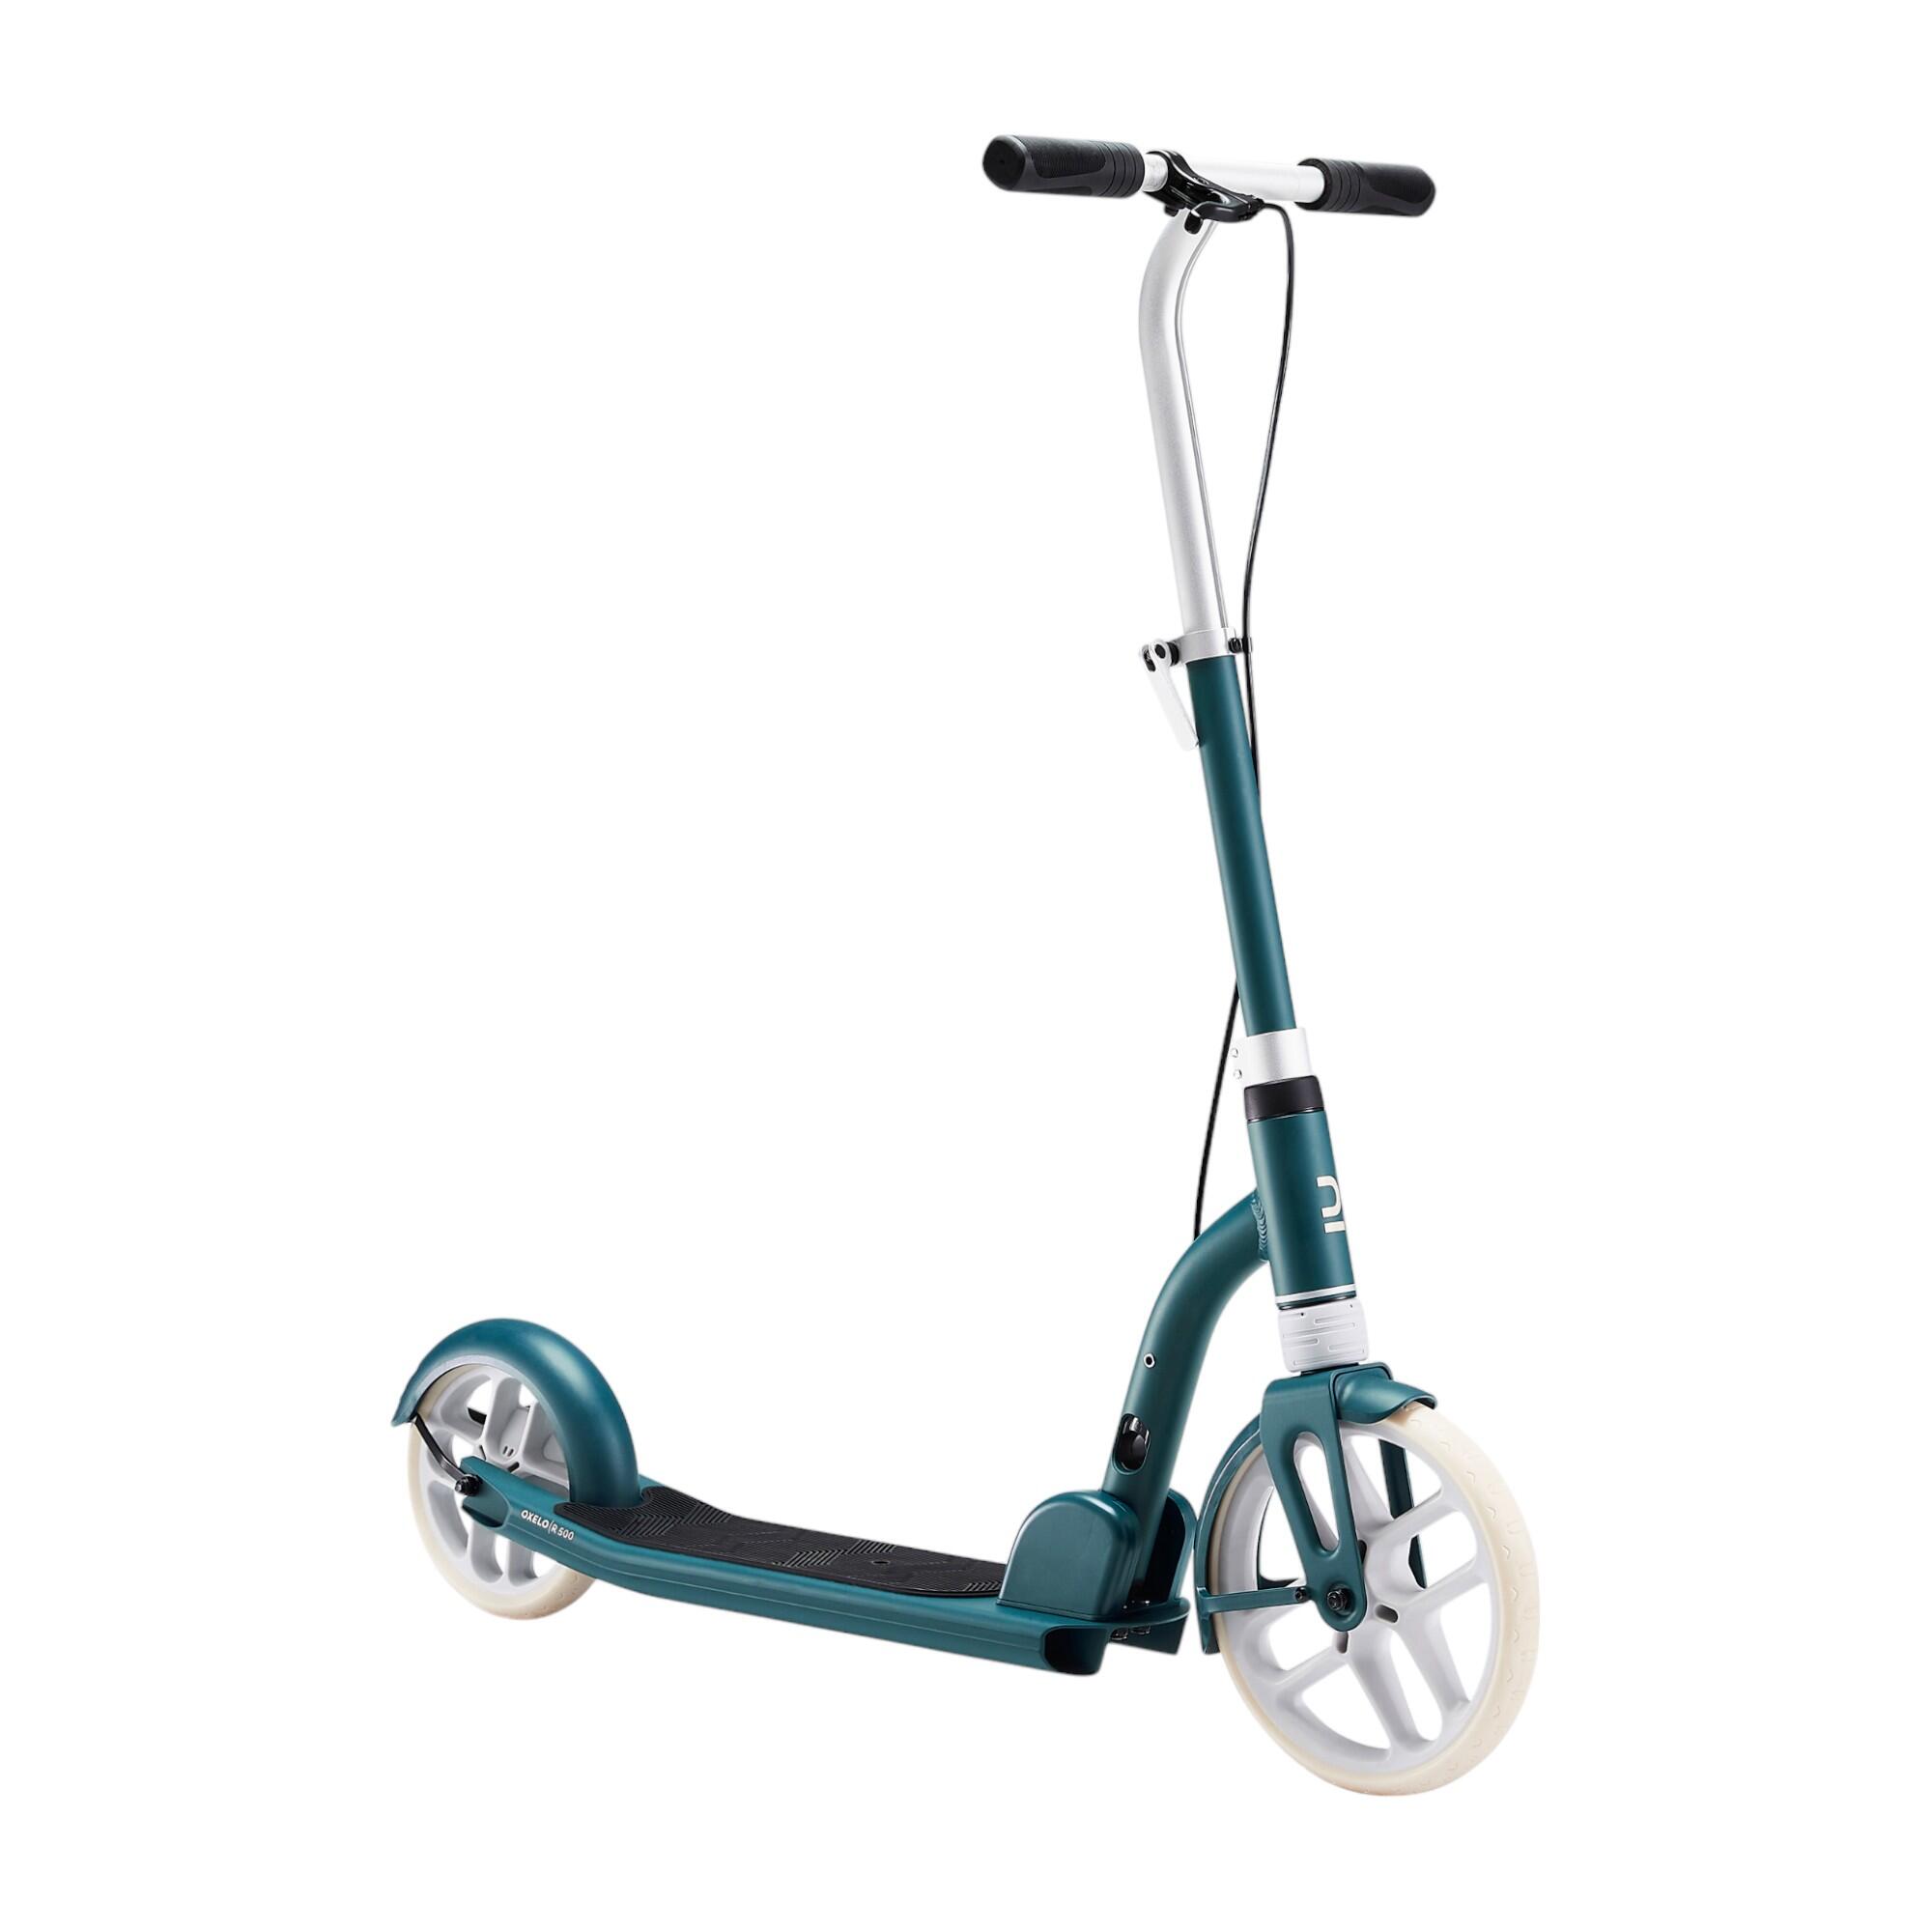 Adult Scooters